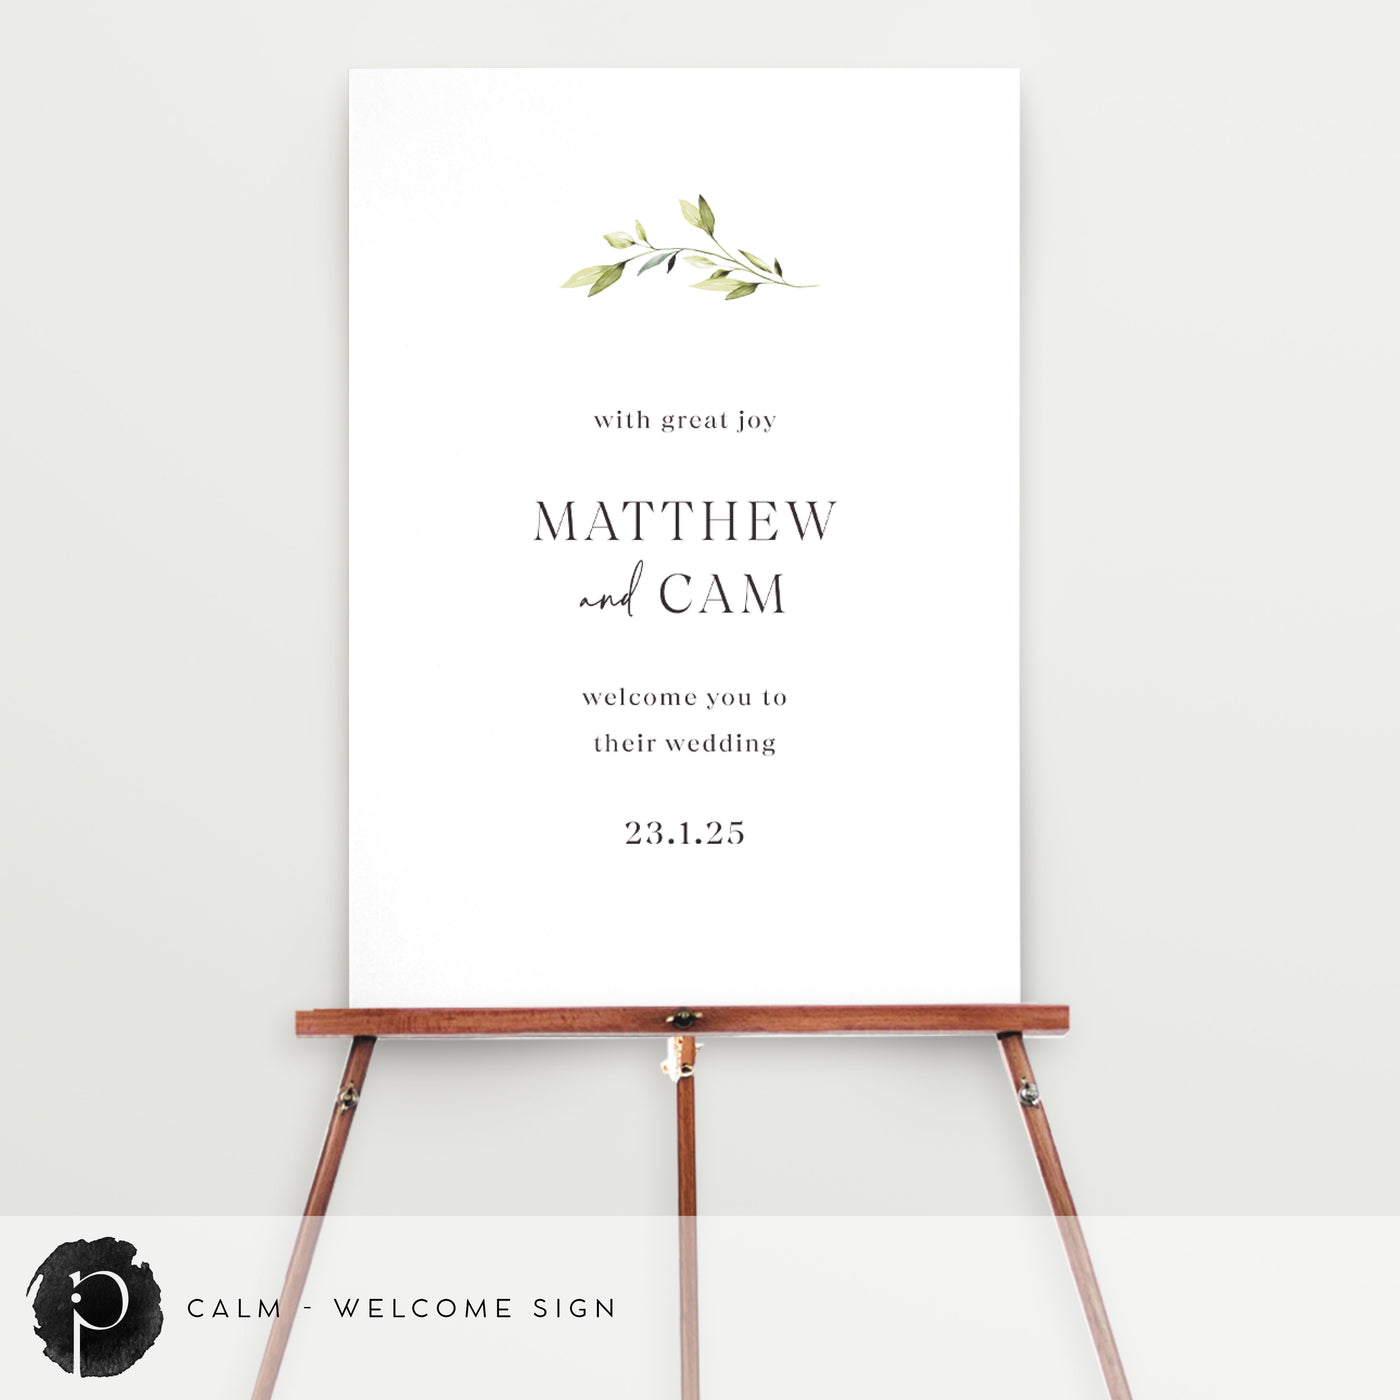 Calm - Welcome Sign